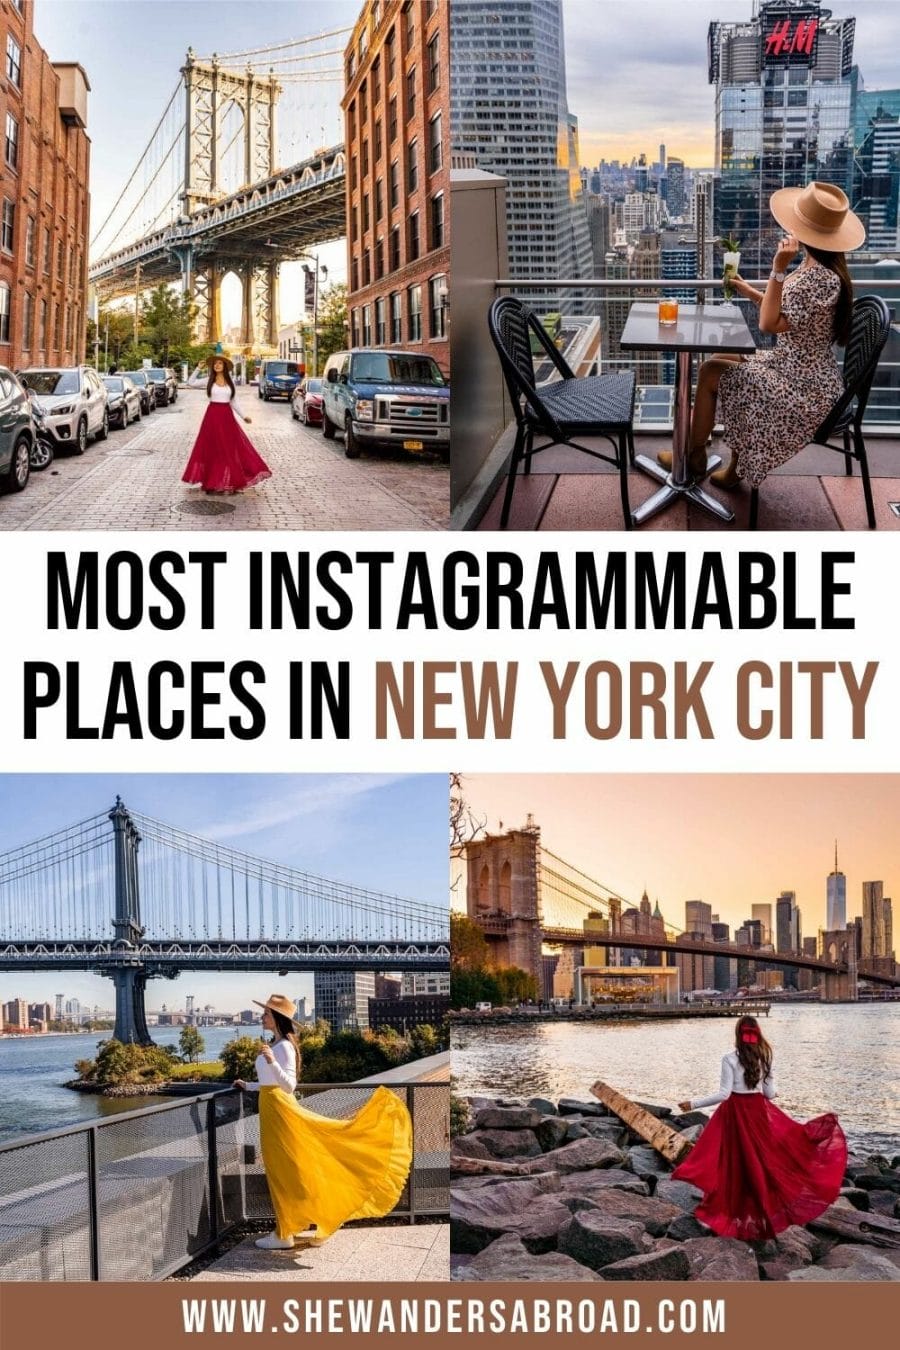 25 Most Instagrammable Places in NYC You Can't Miss